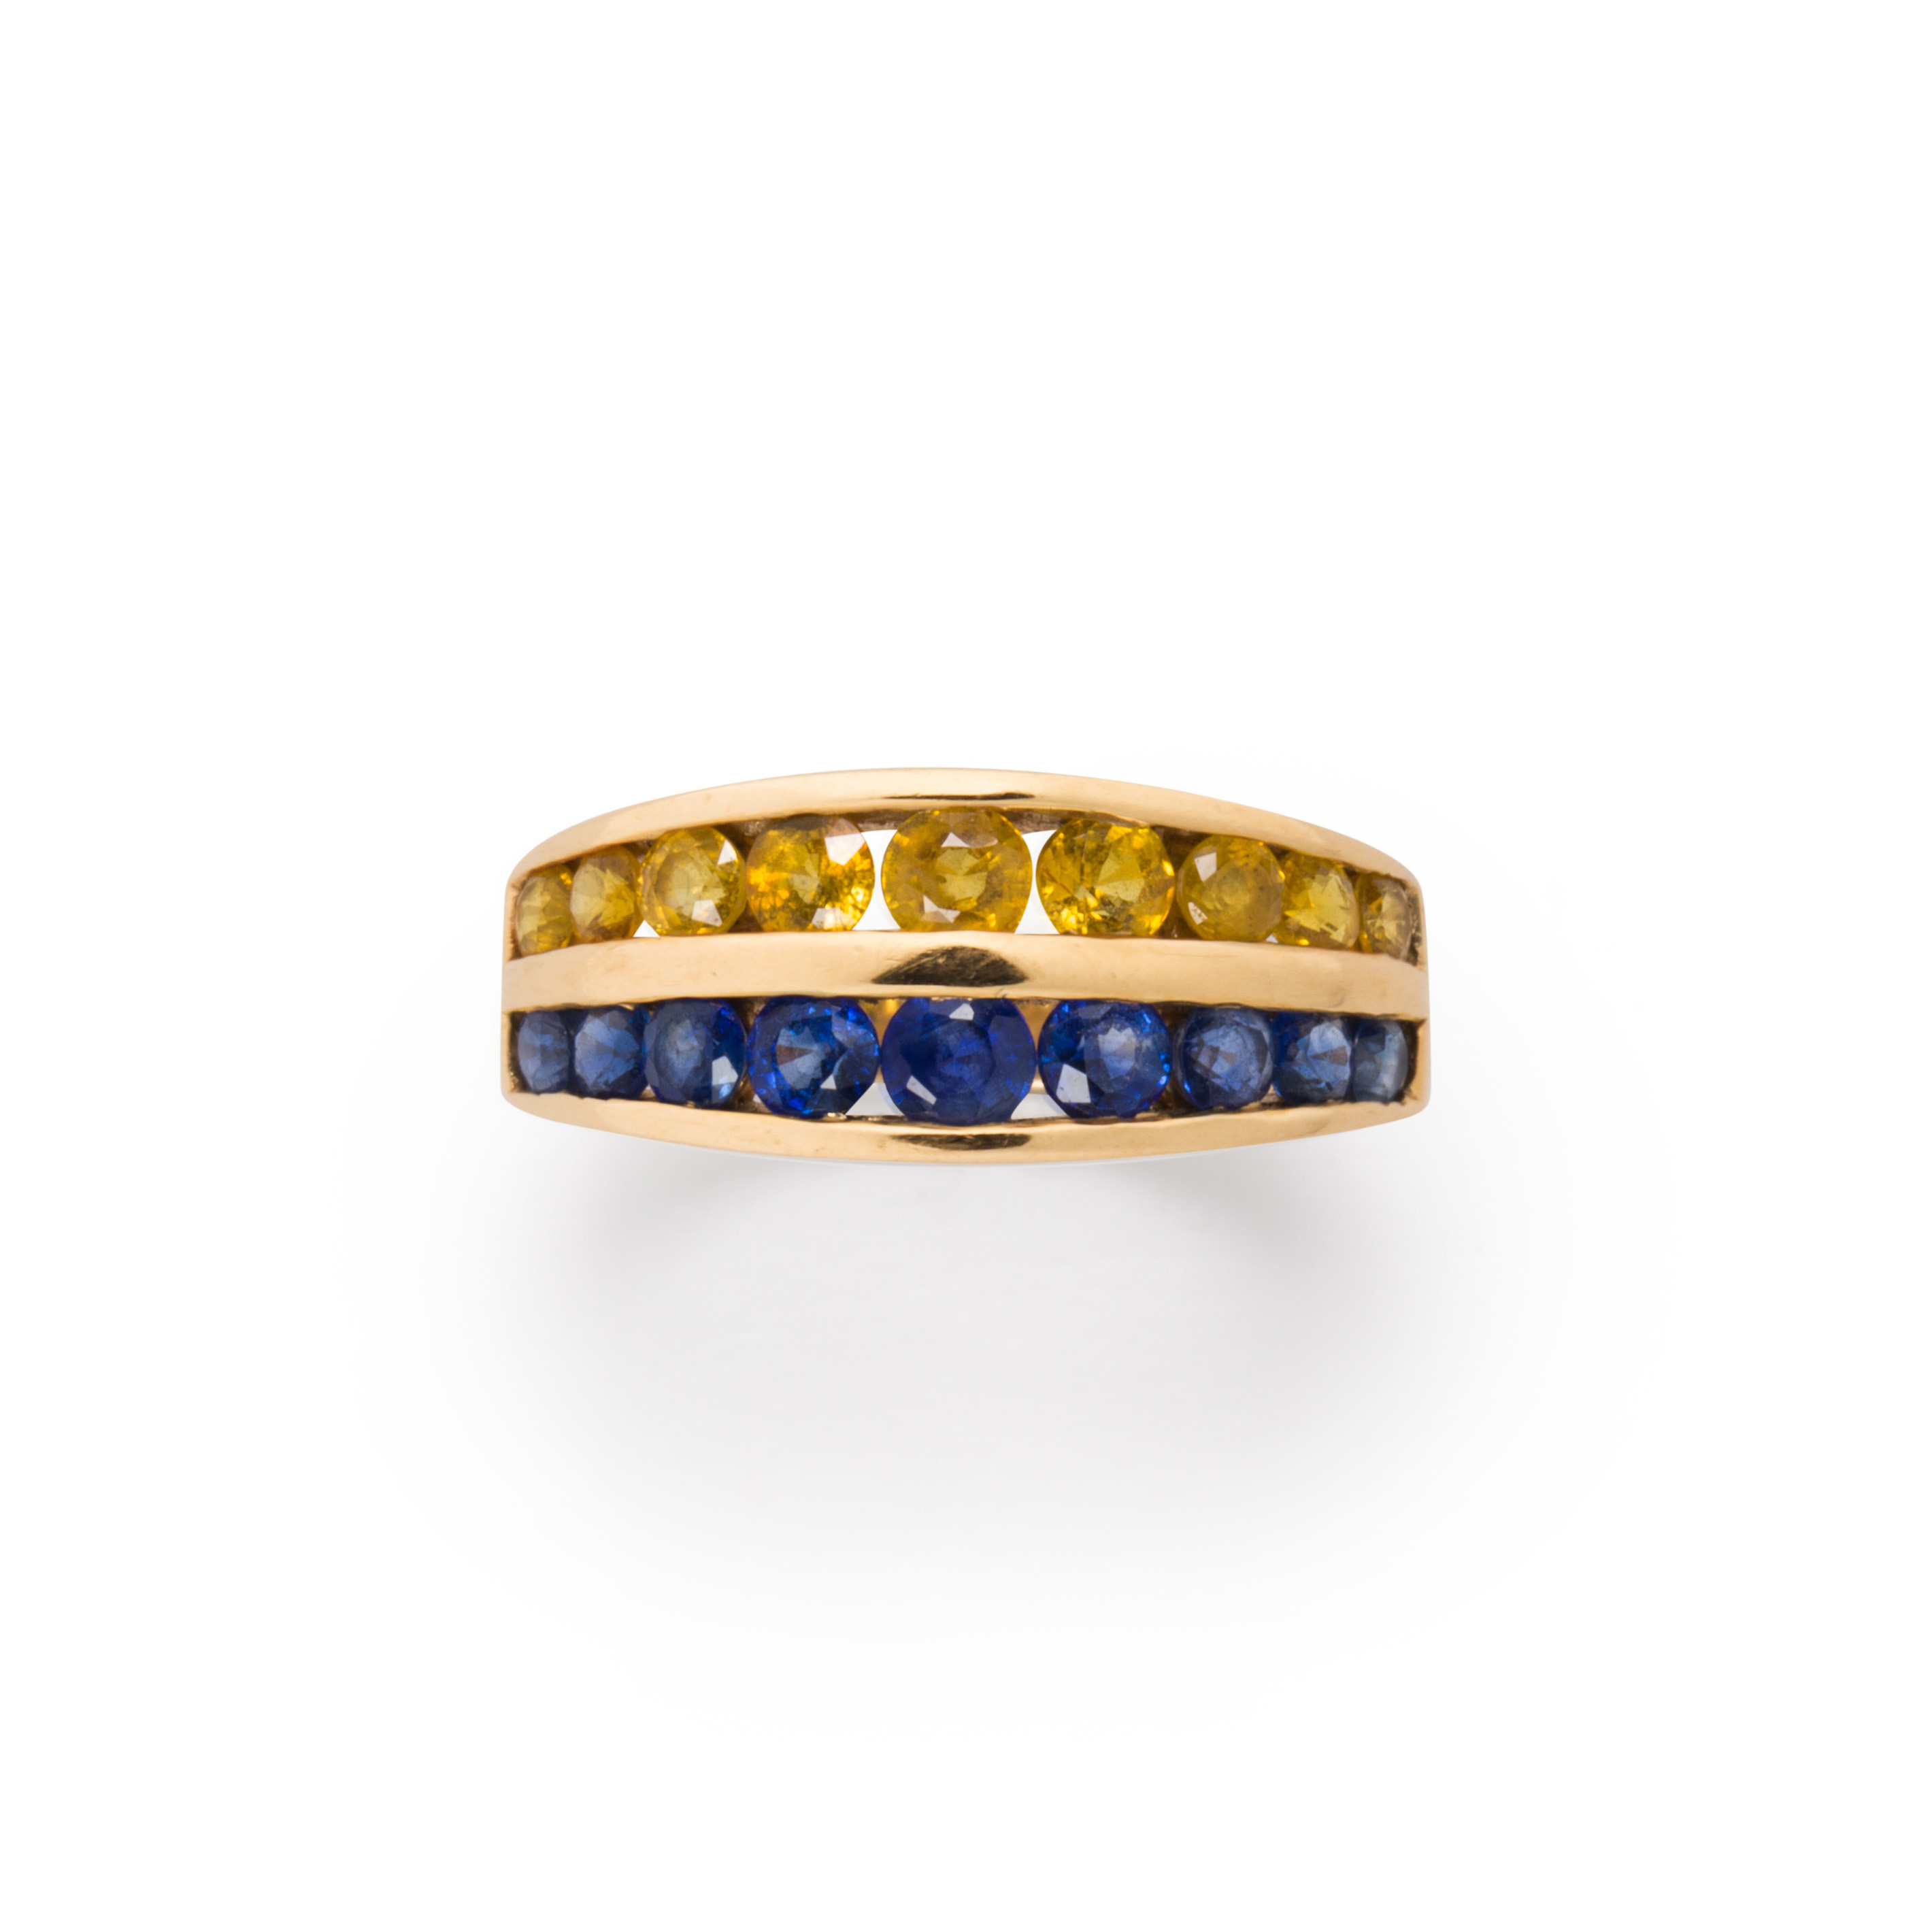 A YELLOW OR BLUE SAPPHIRE AND FOURTEEN